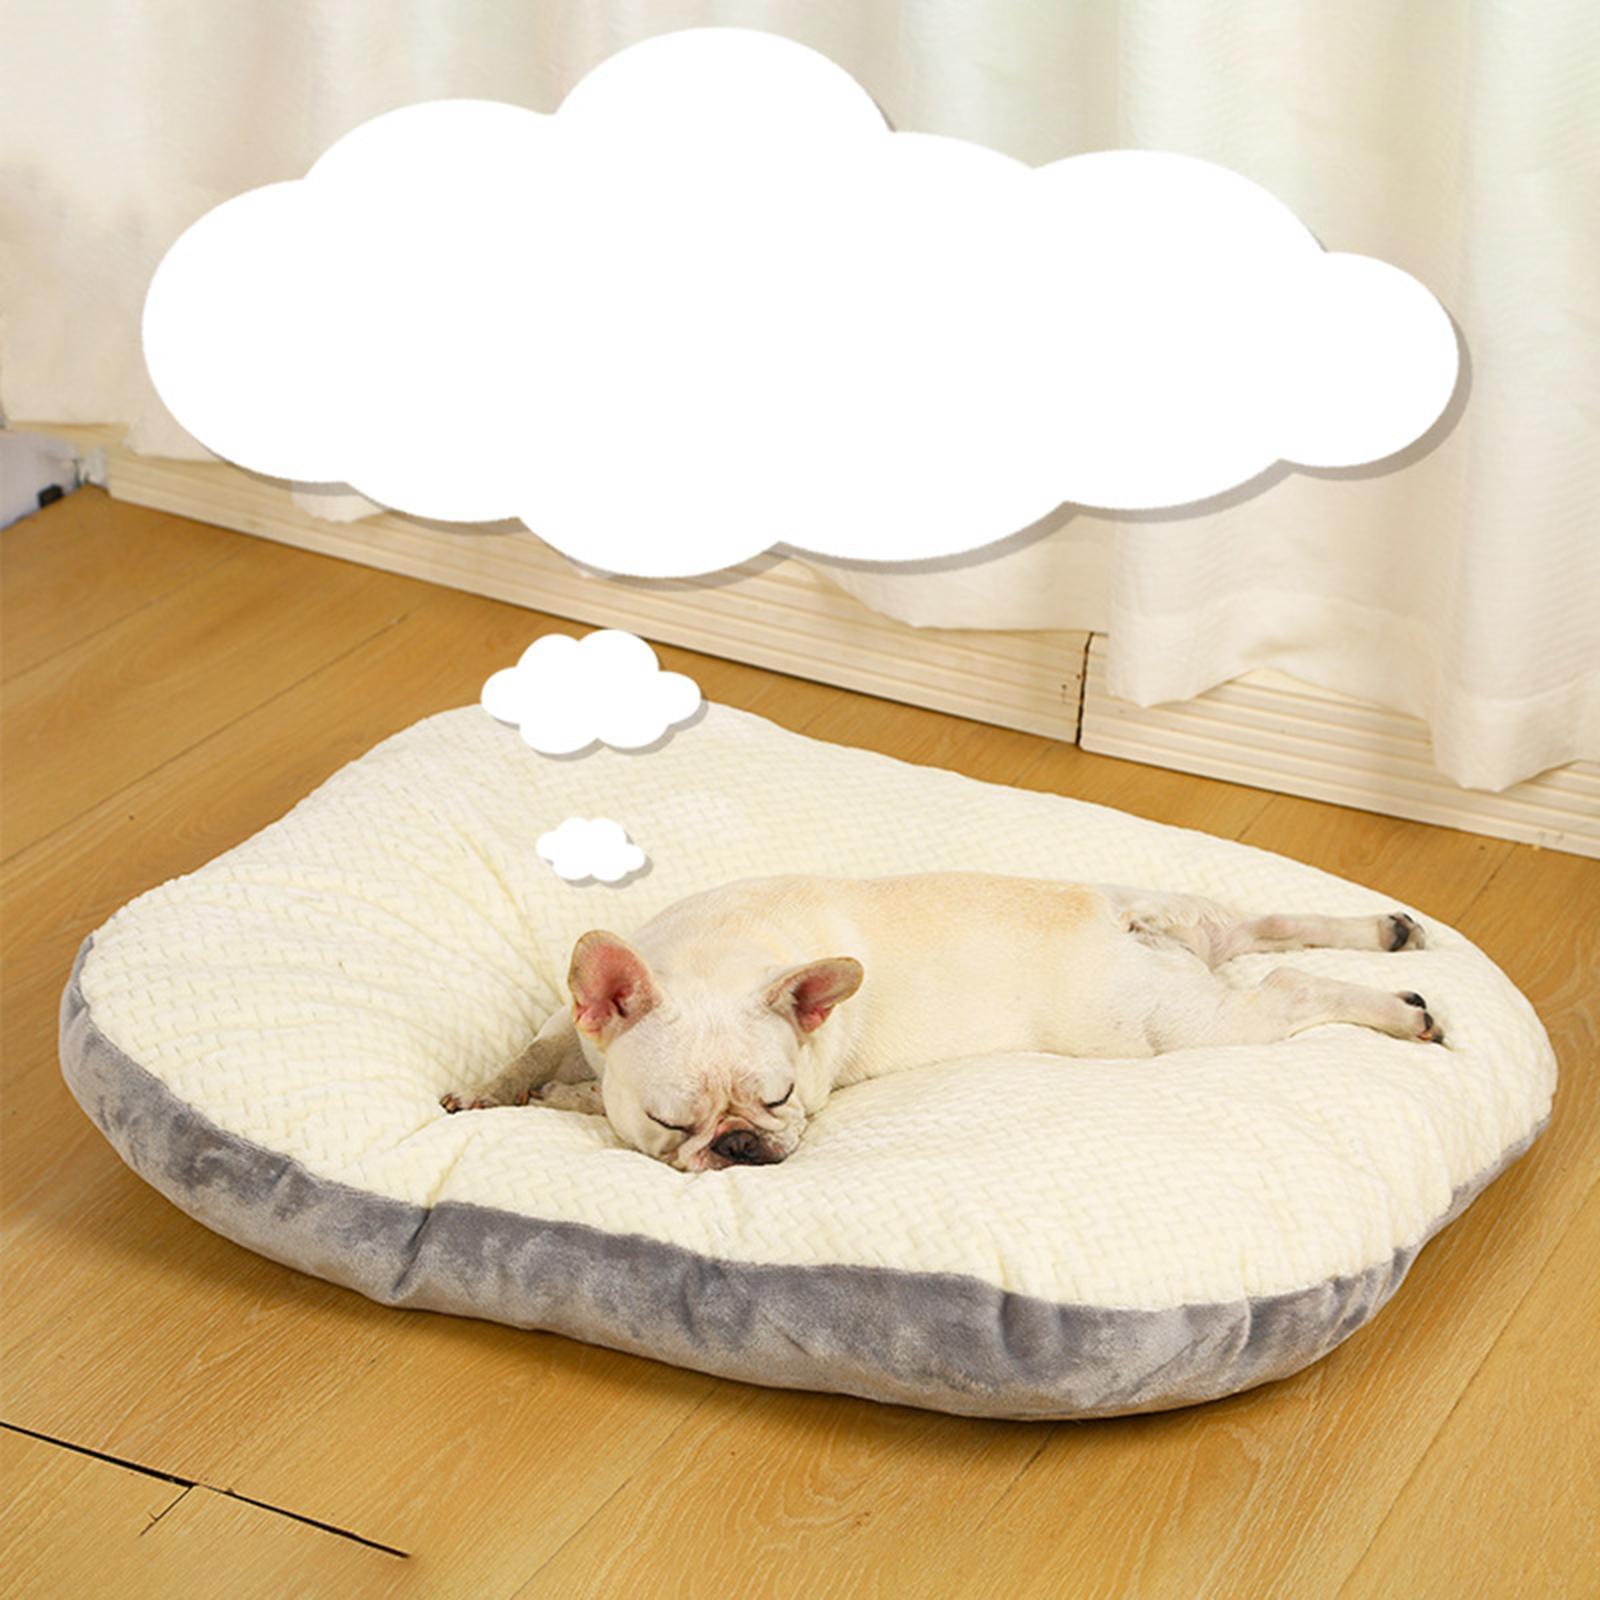 Pet Sleeping Mat Pet Bed Comfortable Breathable Warm Soft Pet Sleeping Dog Bed Kennel Pad for Puppy Cats Rabbits, Dogs Kitten